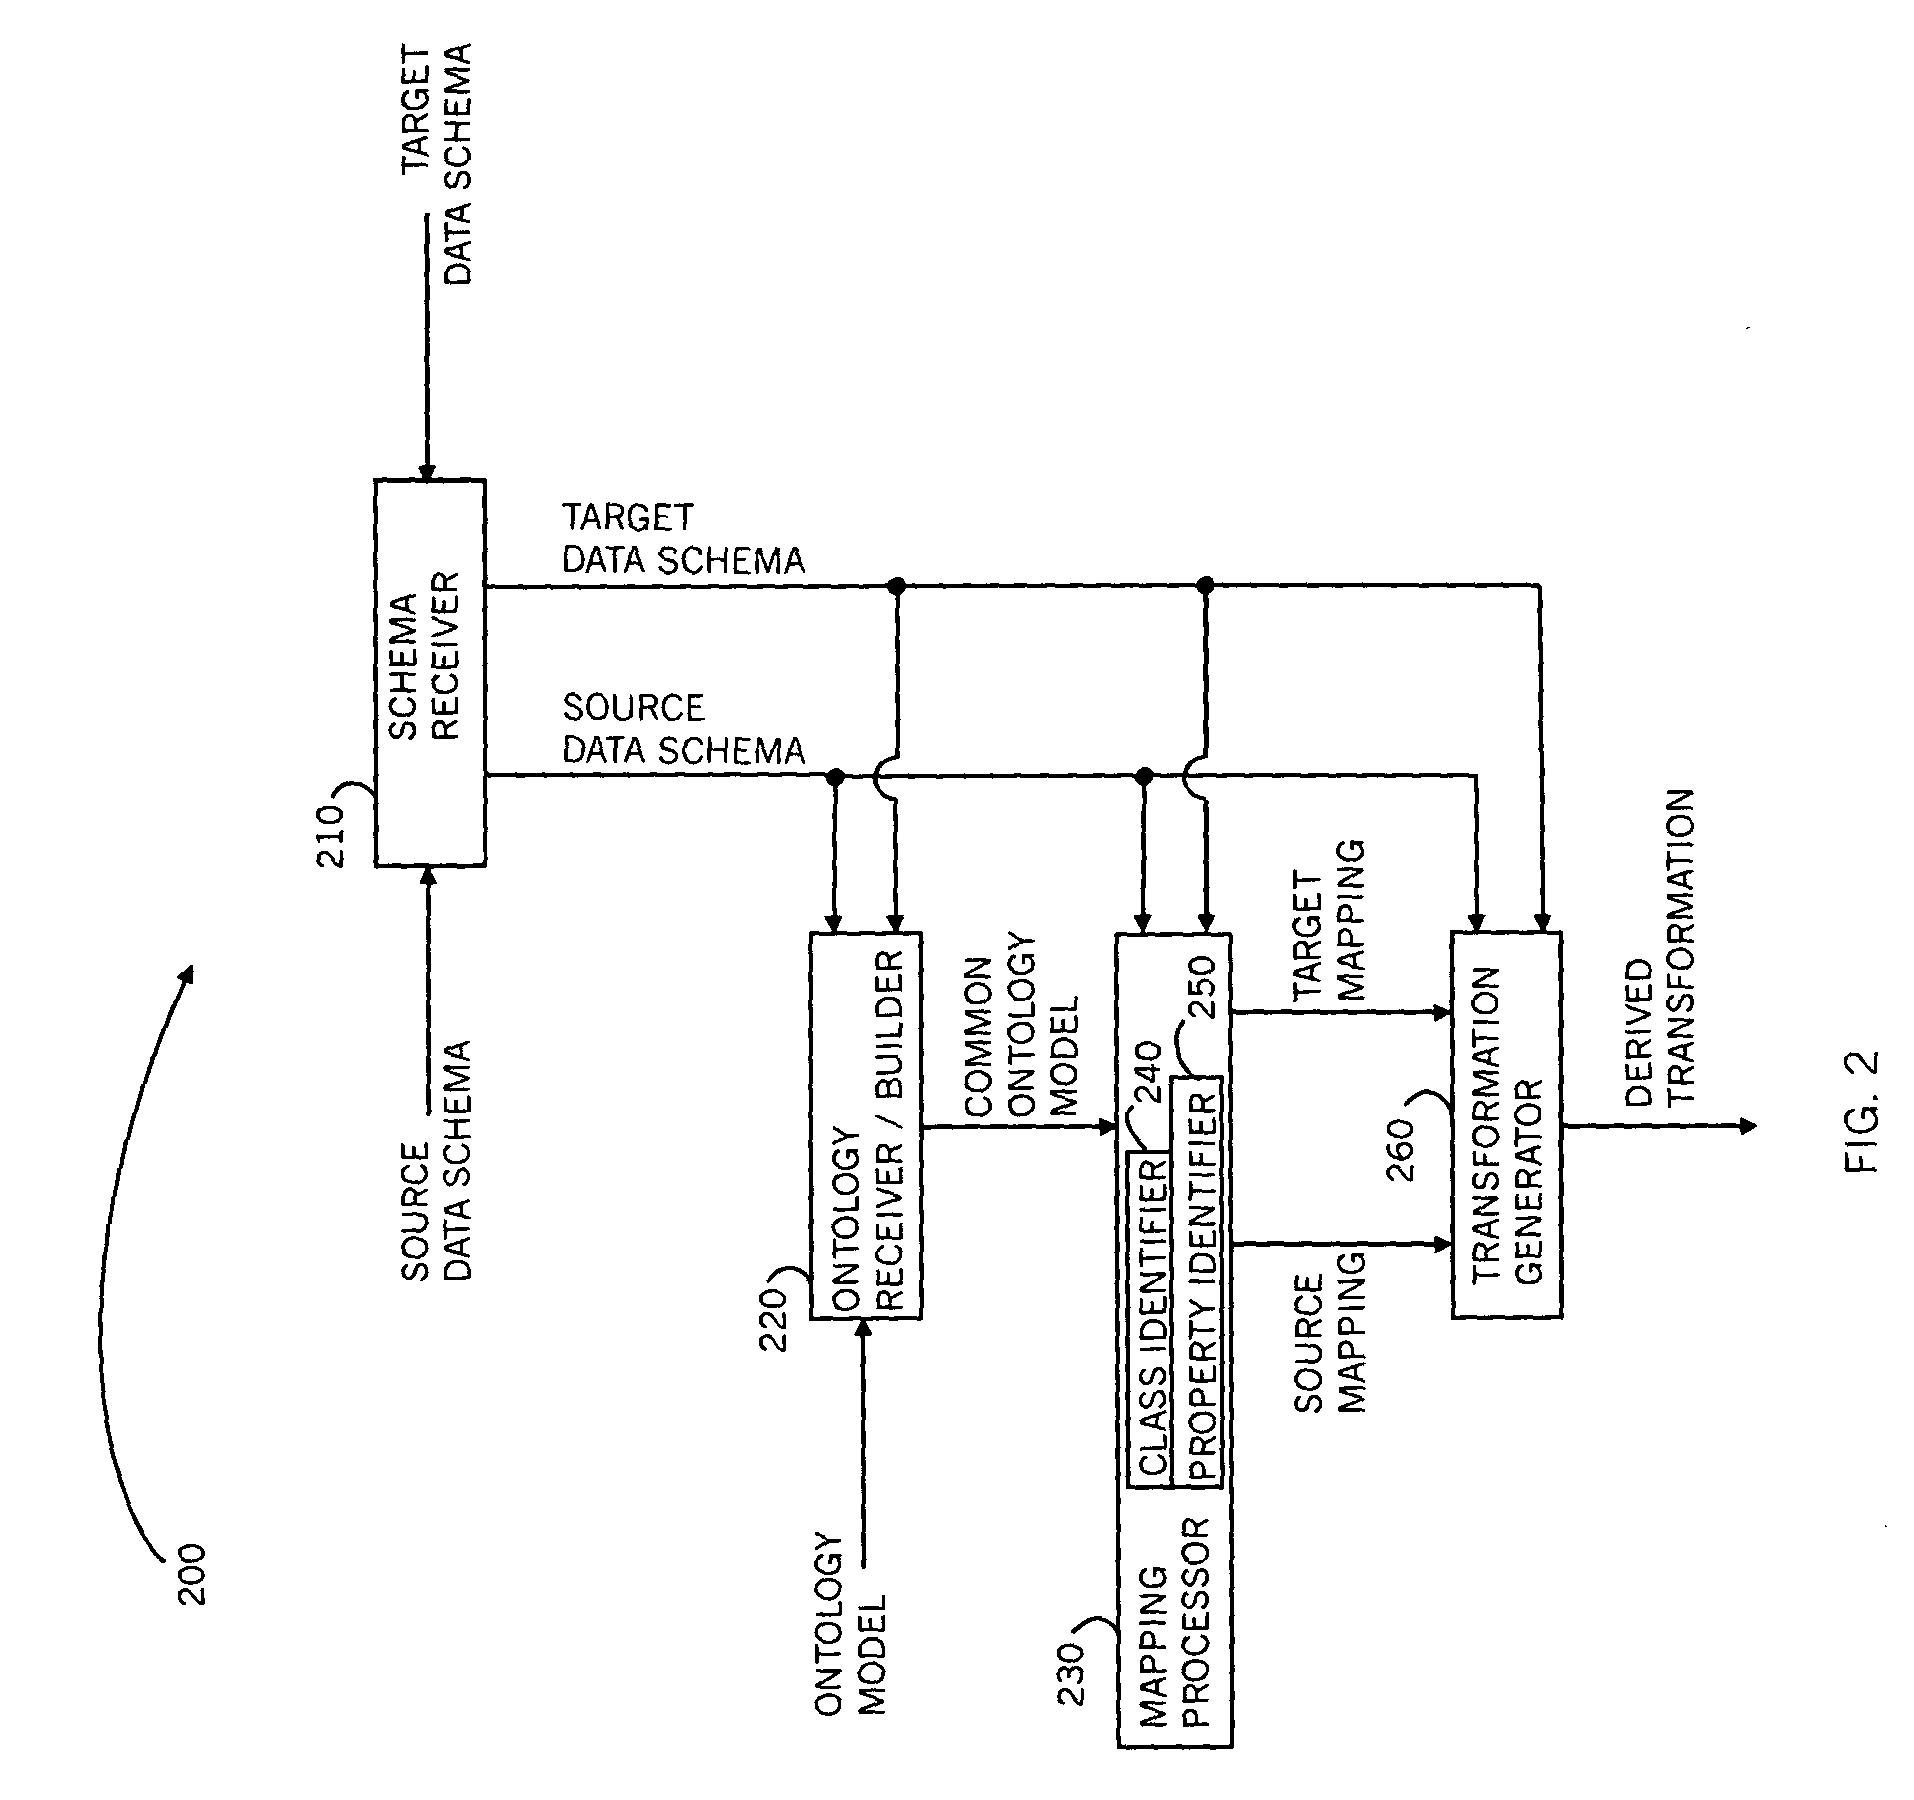 Method and system for mapping enterprise data assets to a semantic information model